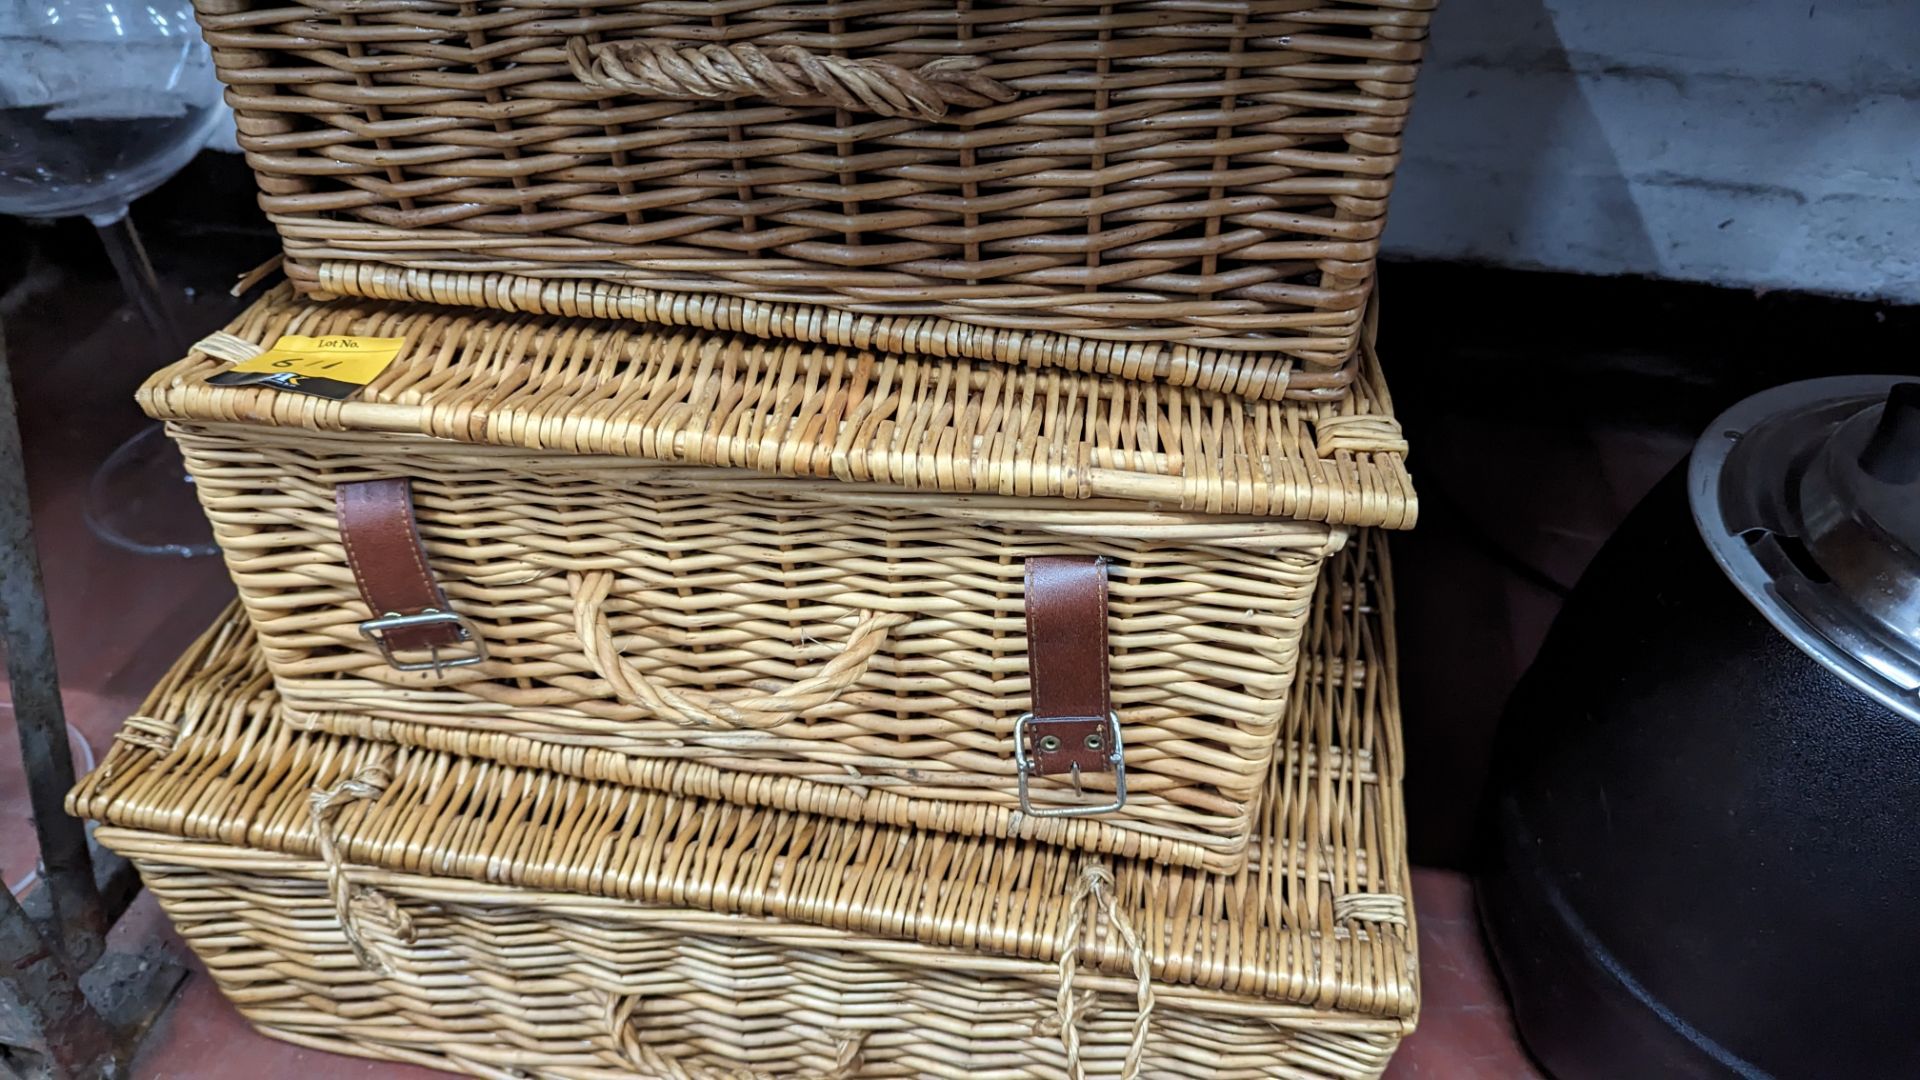 3 off assorted size picnic baskets - Image 4 of 5